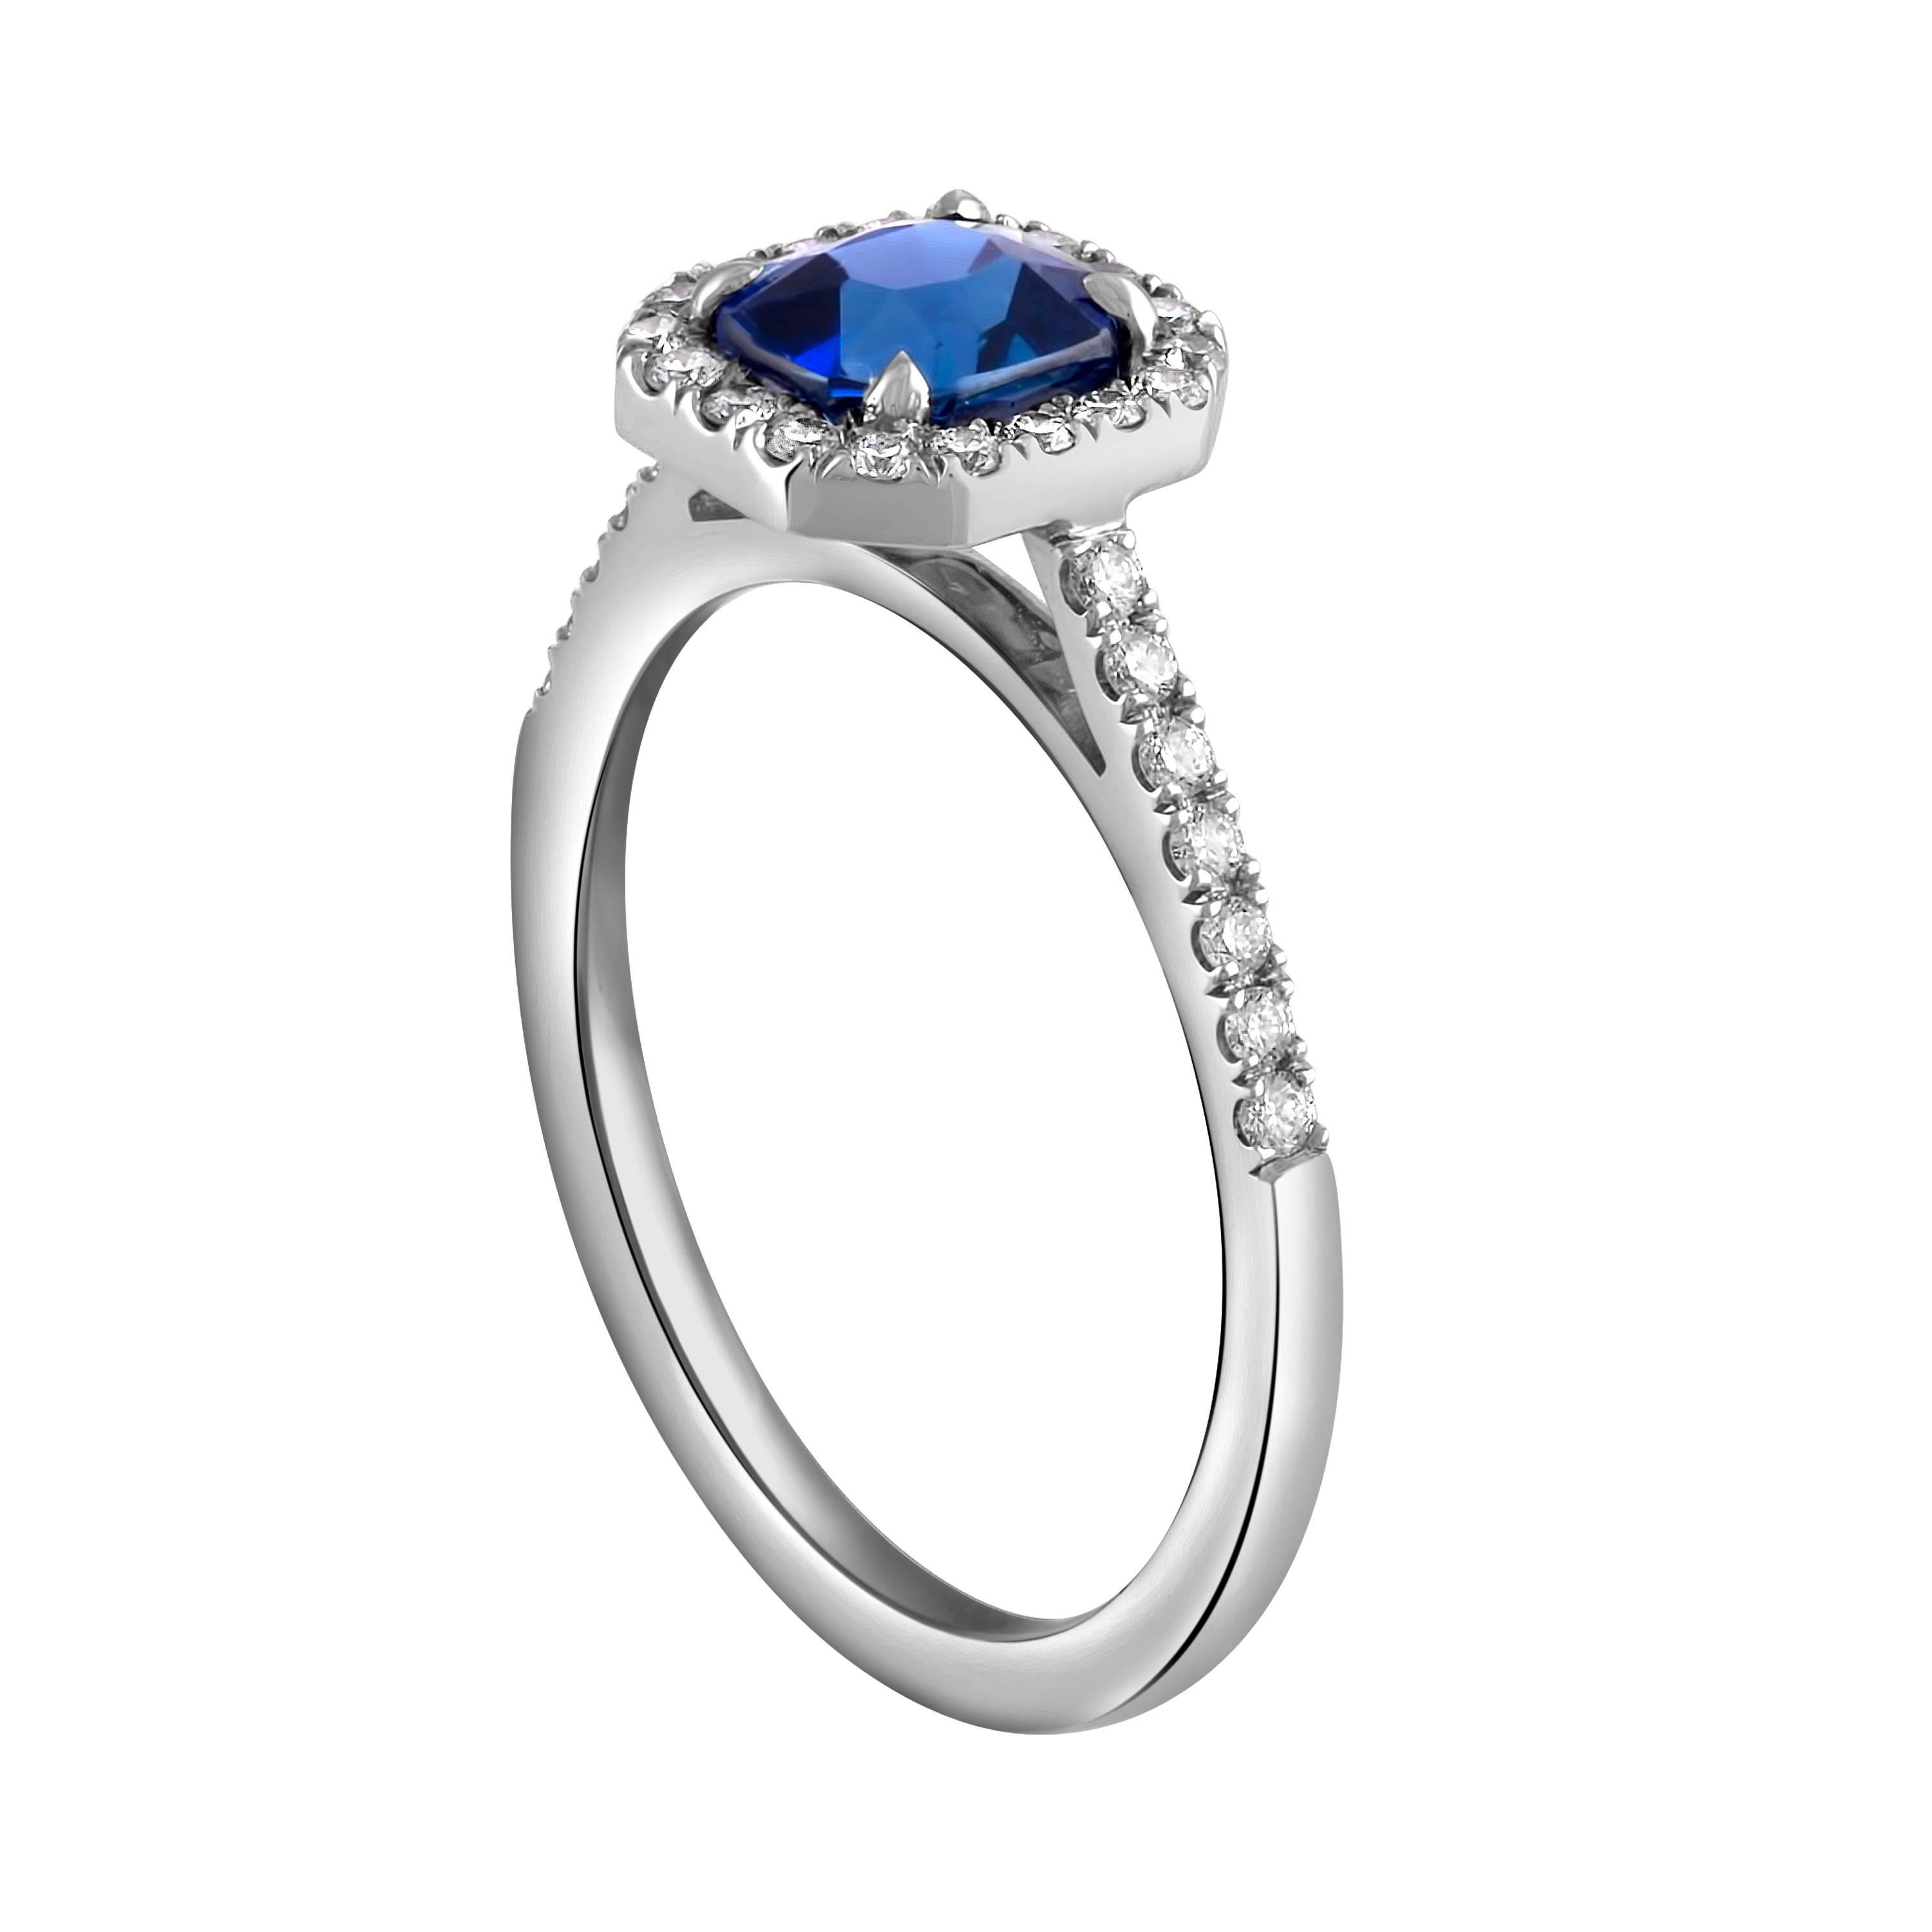 Shah & Shah's handmade platinum and diamond surround ring is designed with a 1.20ct octagonal cut certified natural Kashmir blue sapphire and 0.25 carats of round brilliant cut diamonds.

The ring is a size 6. Initial sizing is complimentary and an